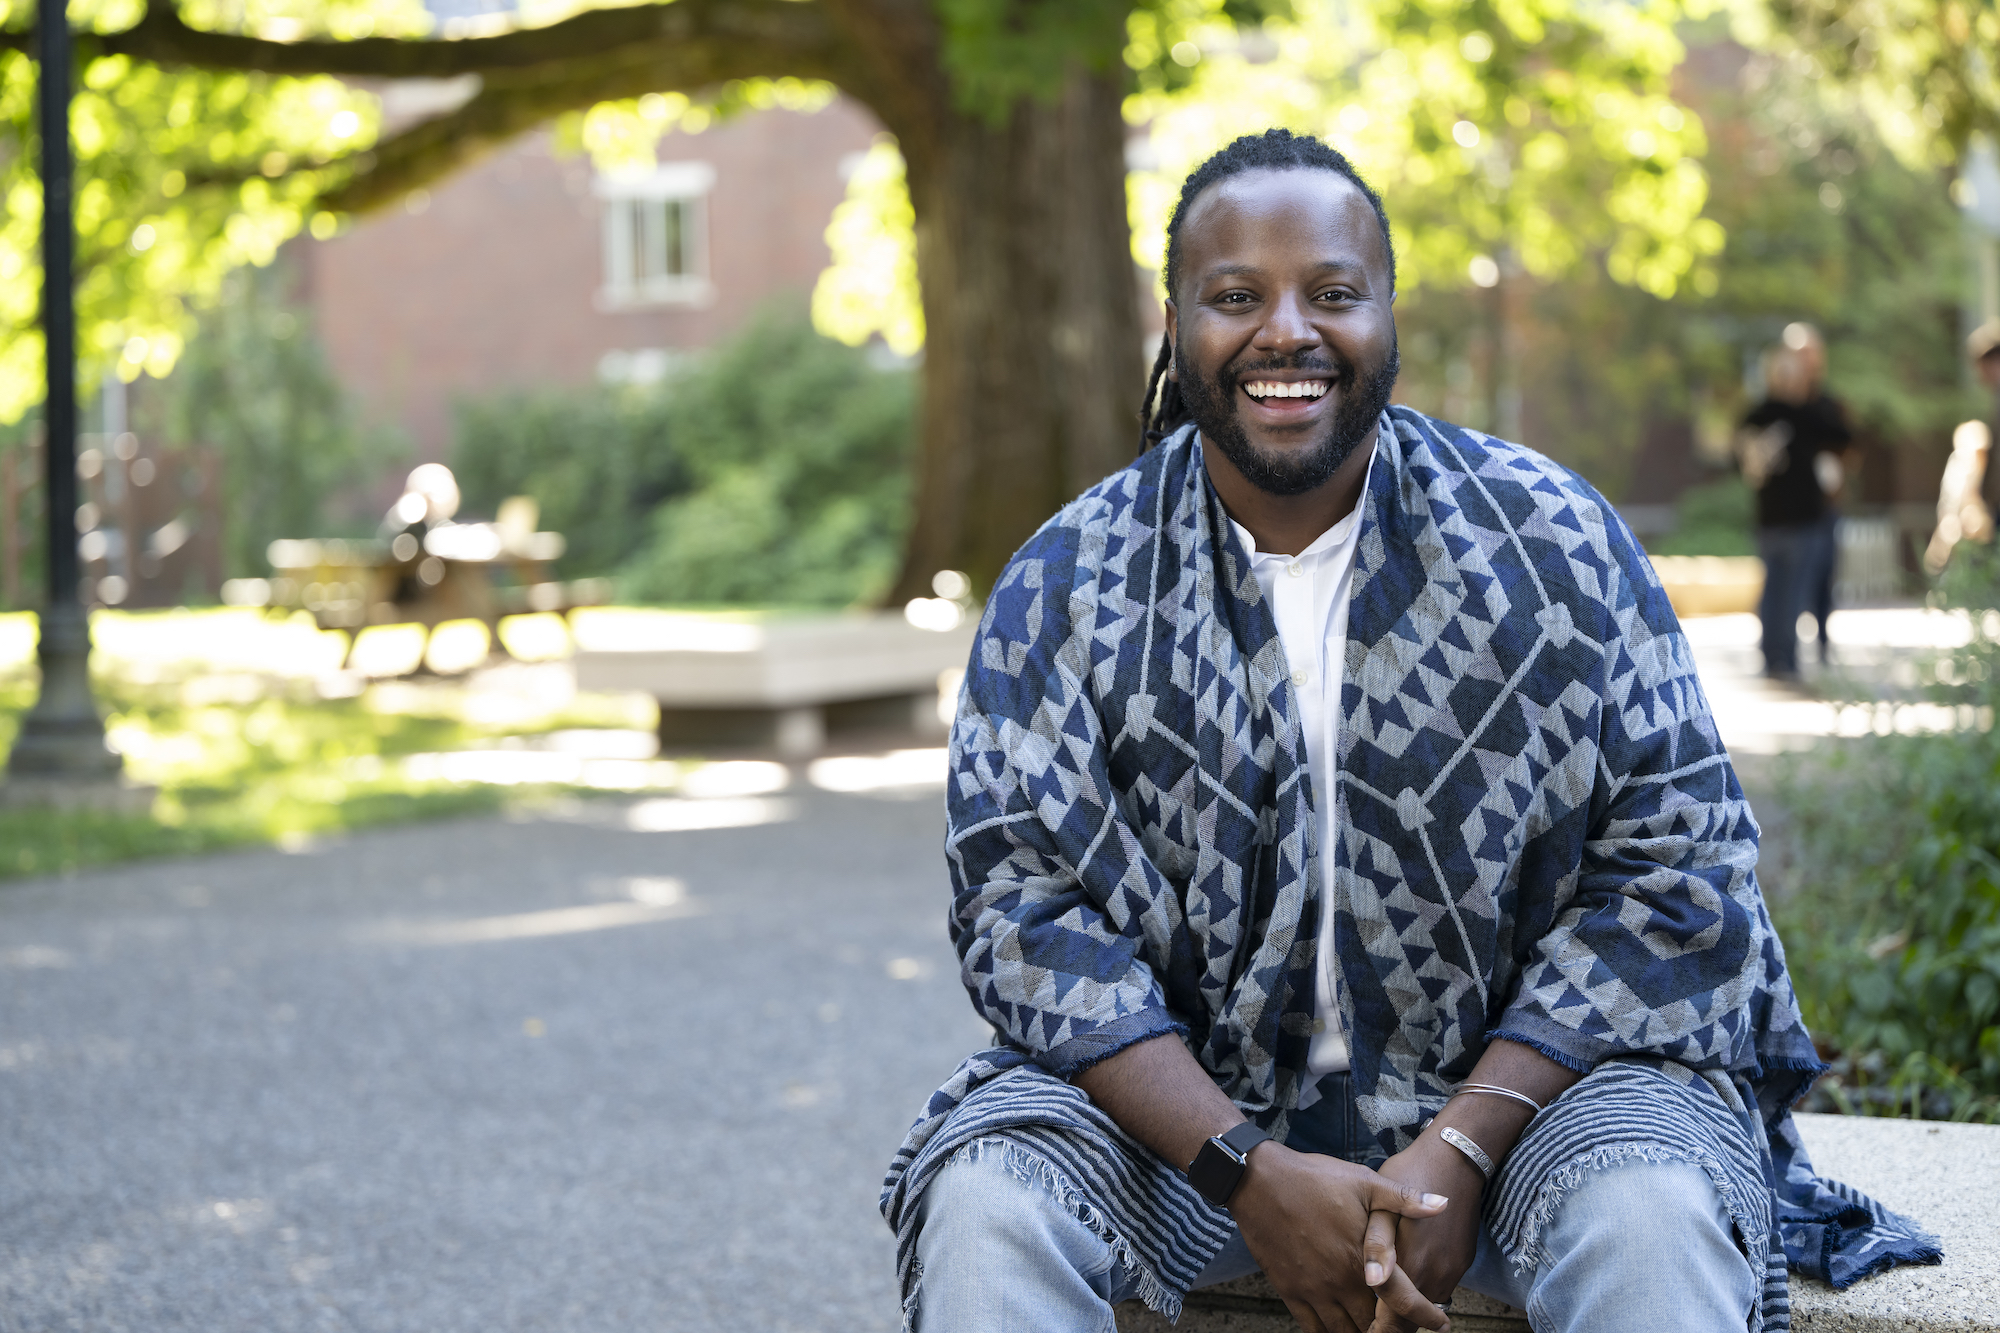 Reed College’s Vice President for Student Life Elected to National Student Affairs Board